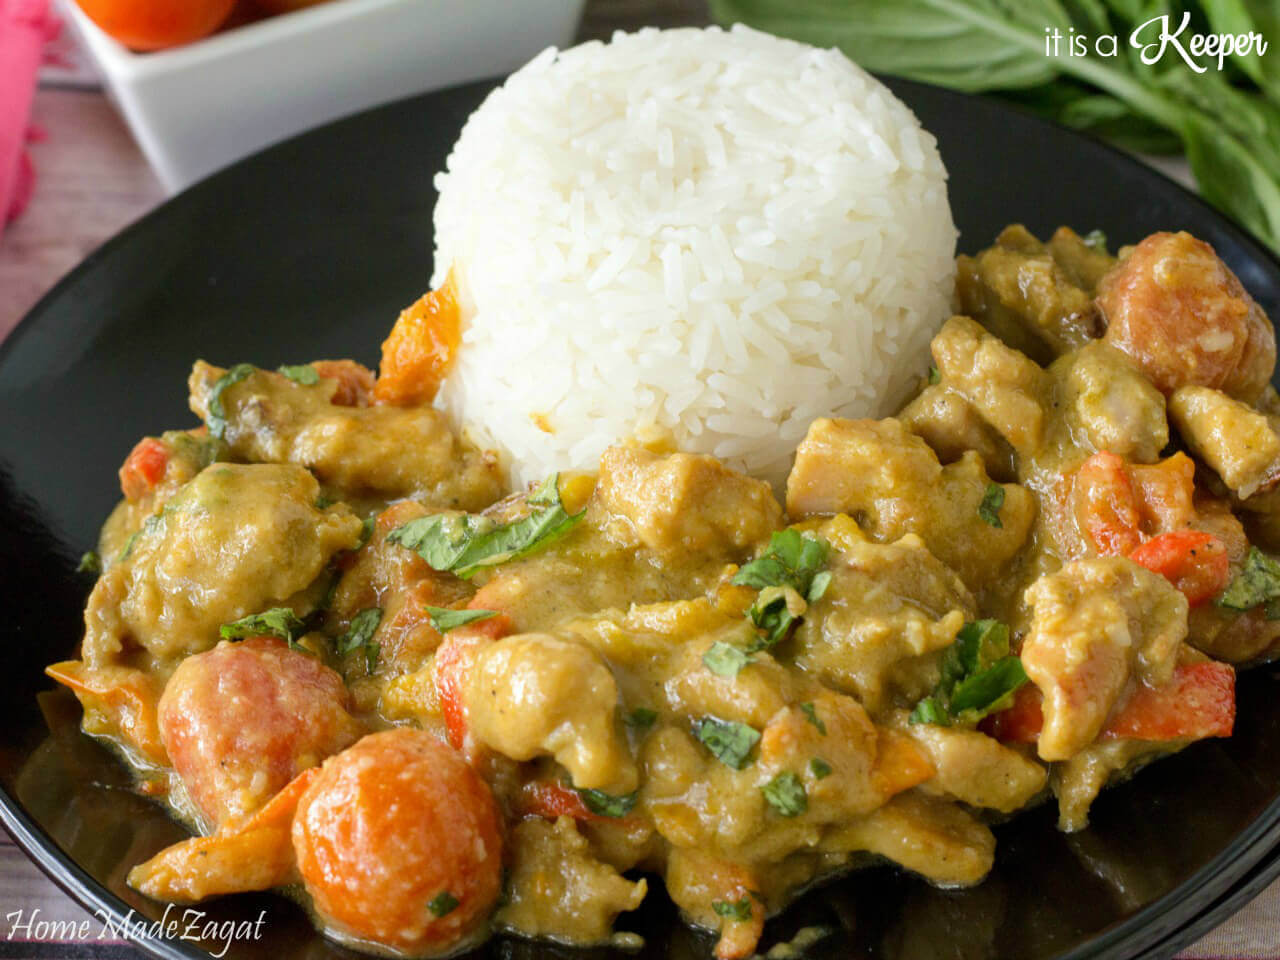 Stir Fried Curry Chicken - this easy 30 minute recipe is a quick dinner idea that is packed with flavor